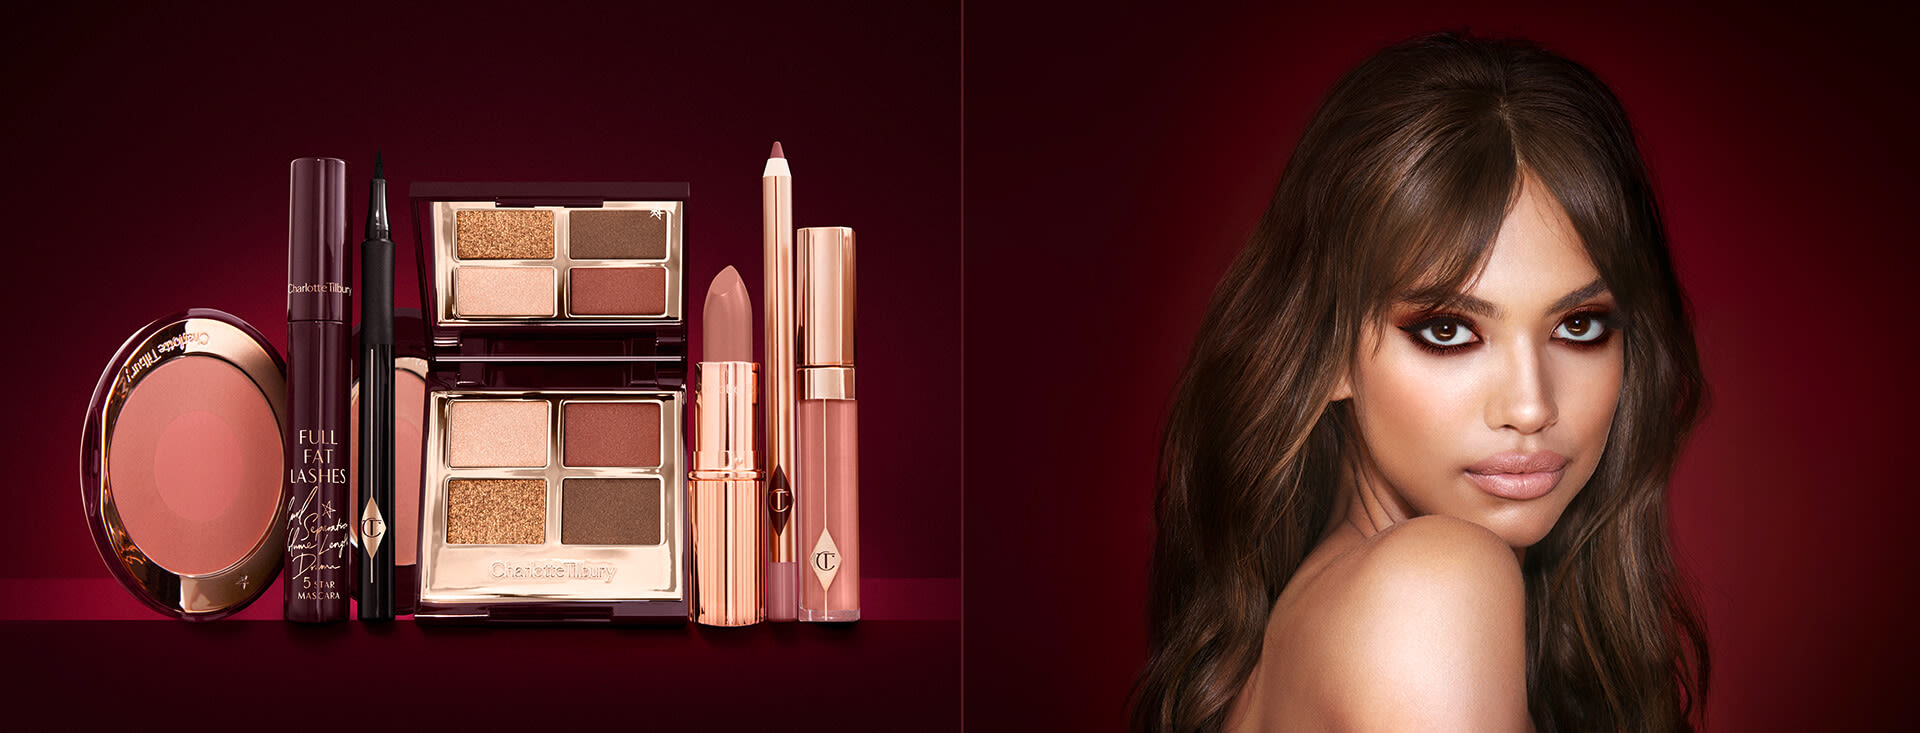 A medium-tone model with brown eyes wearing smokey brown and gold eye makeup with warm pink blush and glossy nude-pink lips next to a makeup kit that includes an open, mirrored-lid eyeshadow palette in matte and shimmery brown and gold shades, an open black eyeliner pen, a mascara in a dark-crimson colour scheme, a berry-rose lipstick with a matching lip liner pencil, nude pink lip gloss, and an open two-tone blush in warm pink. 